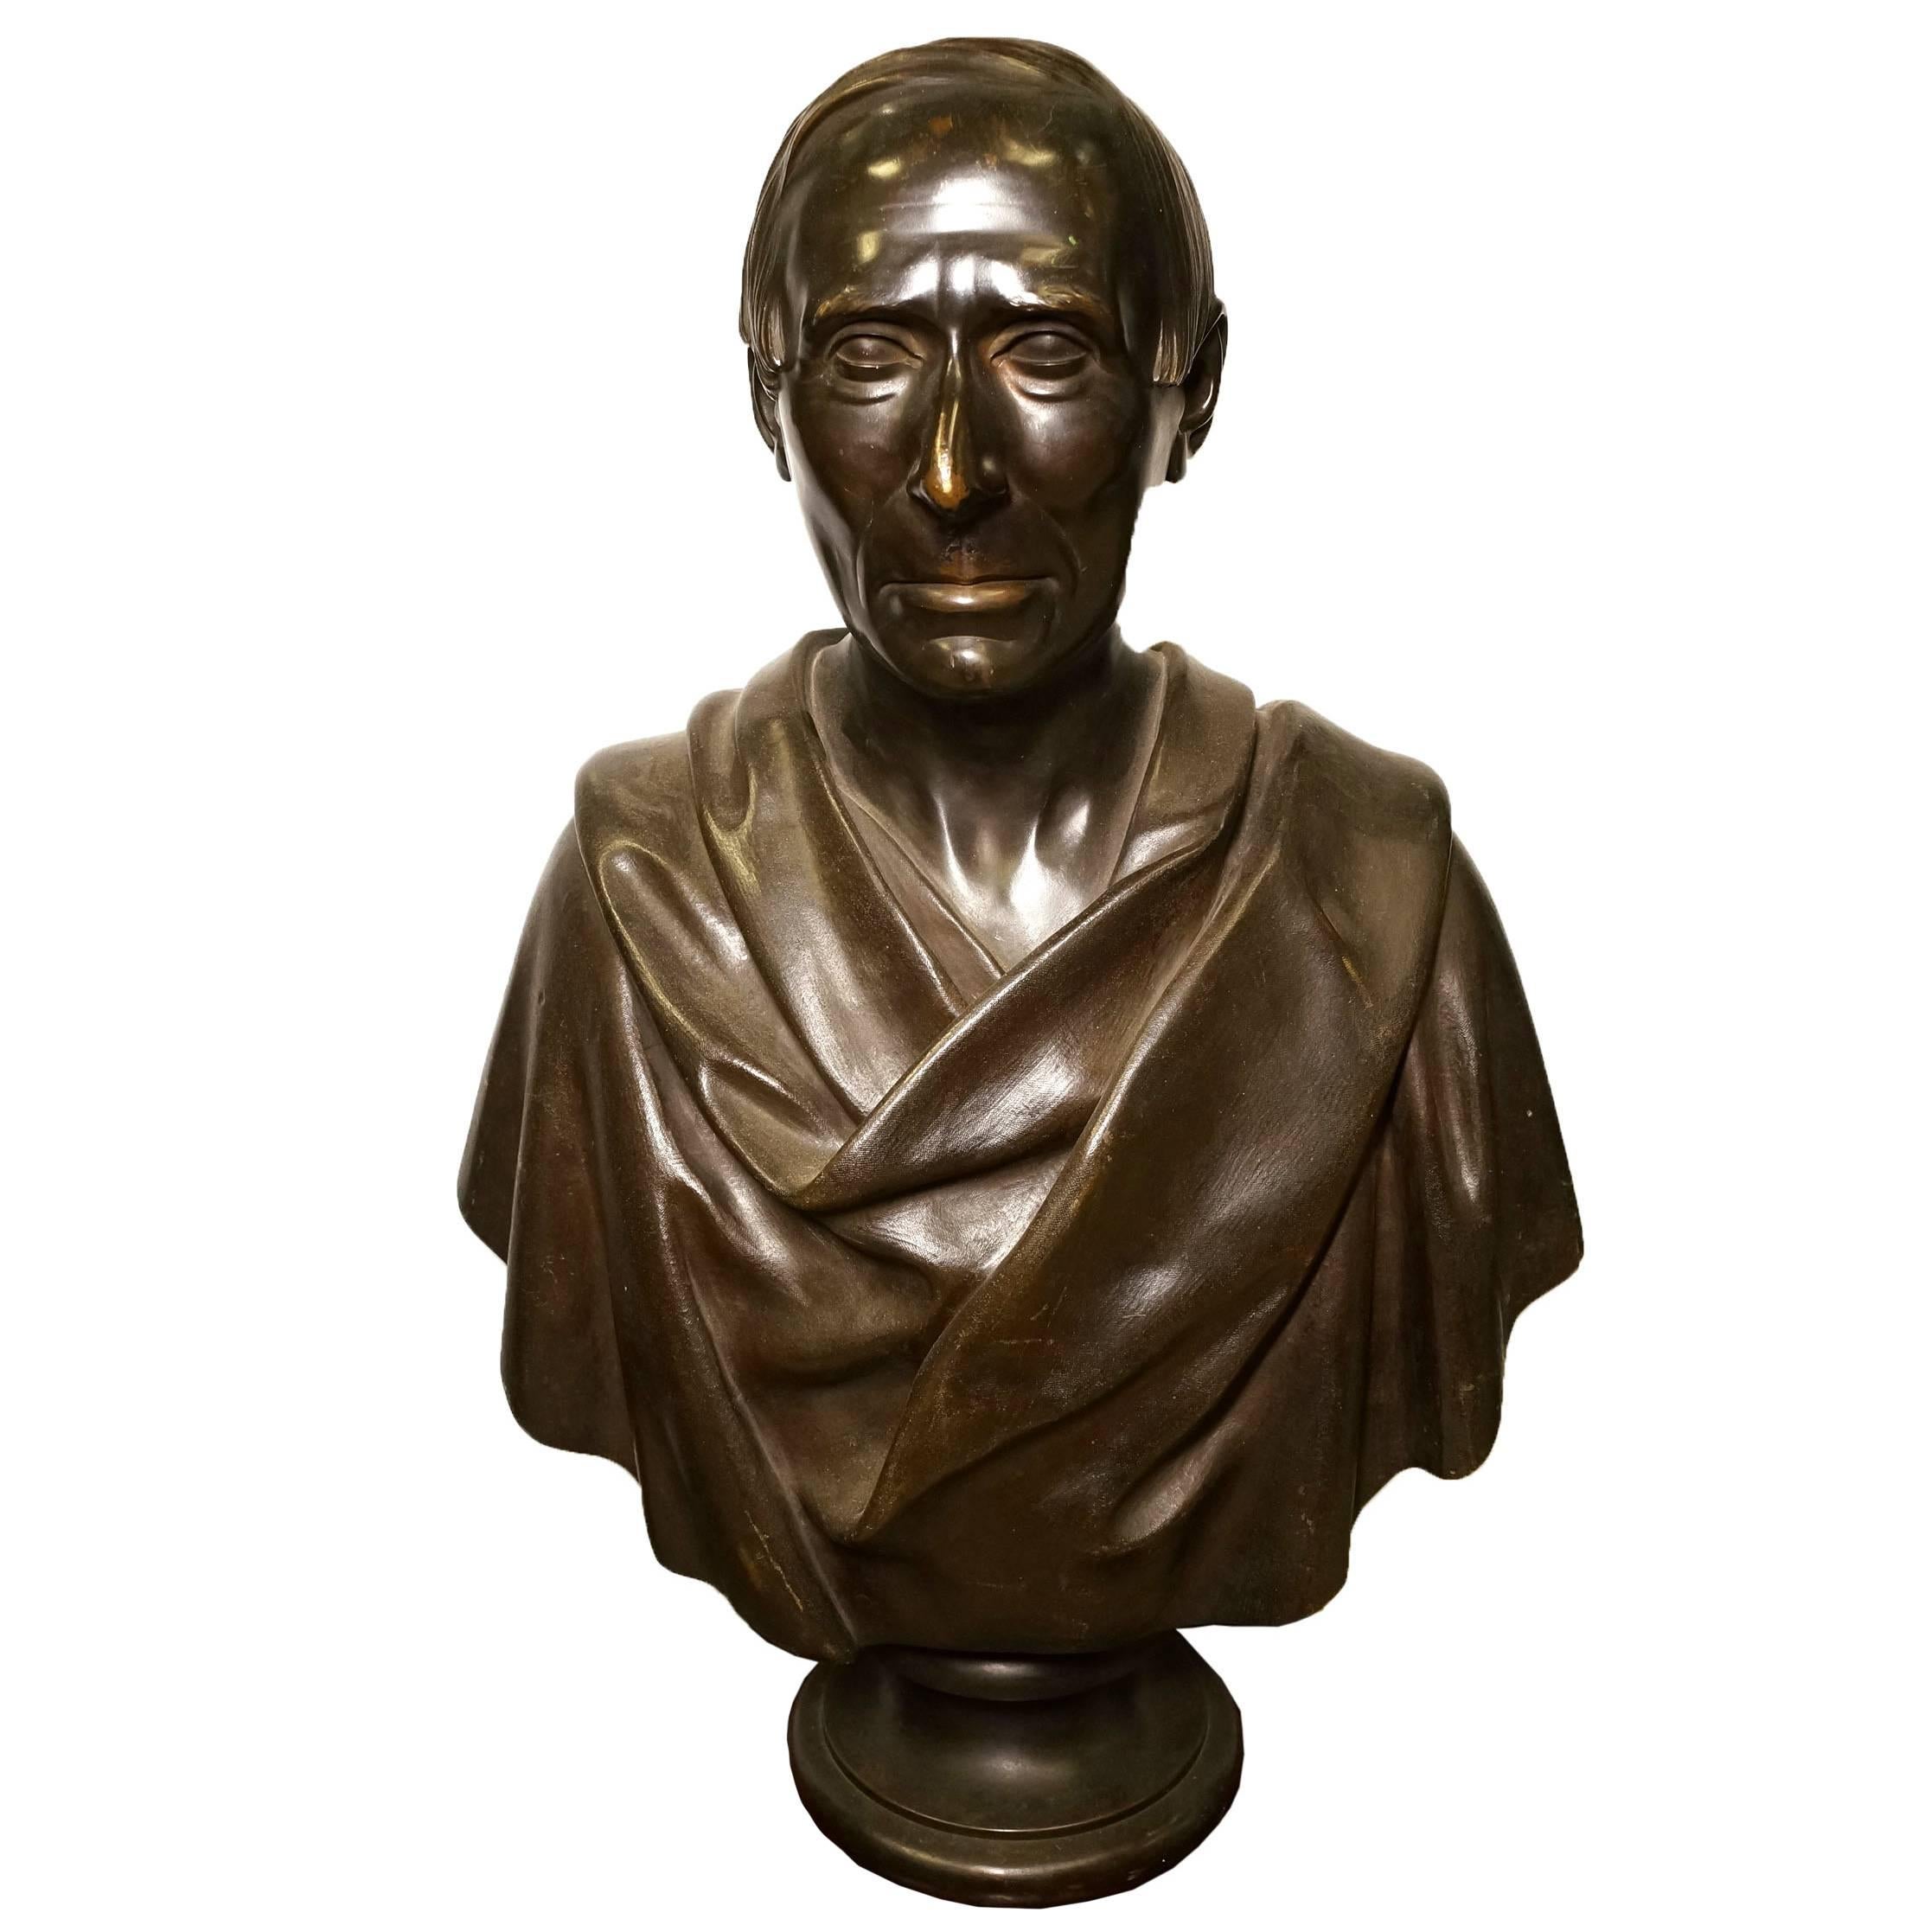 Fine Patinated Bronze Bust of a Roman or Greek Nobleman